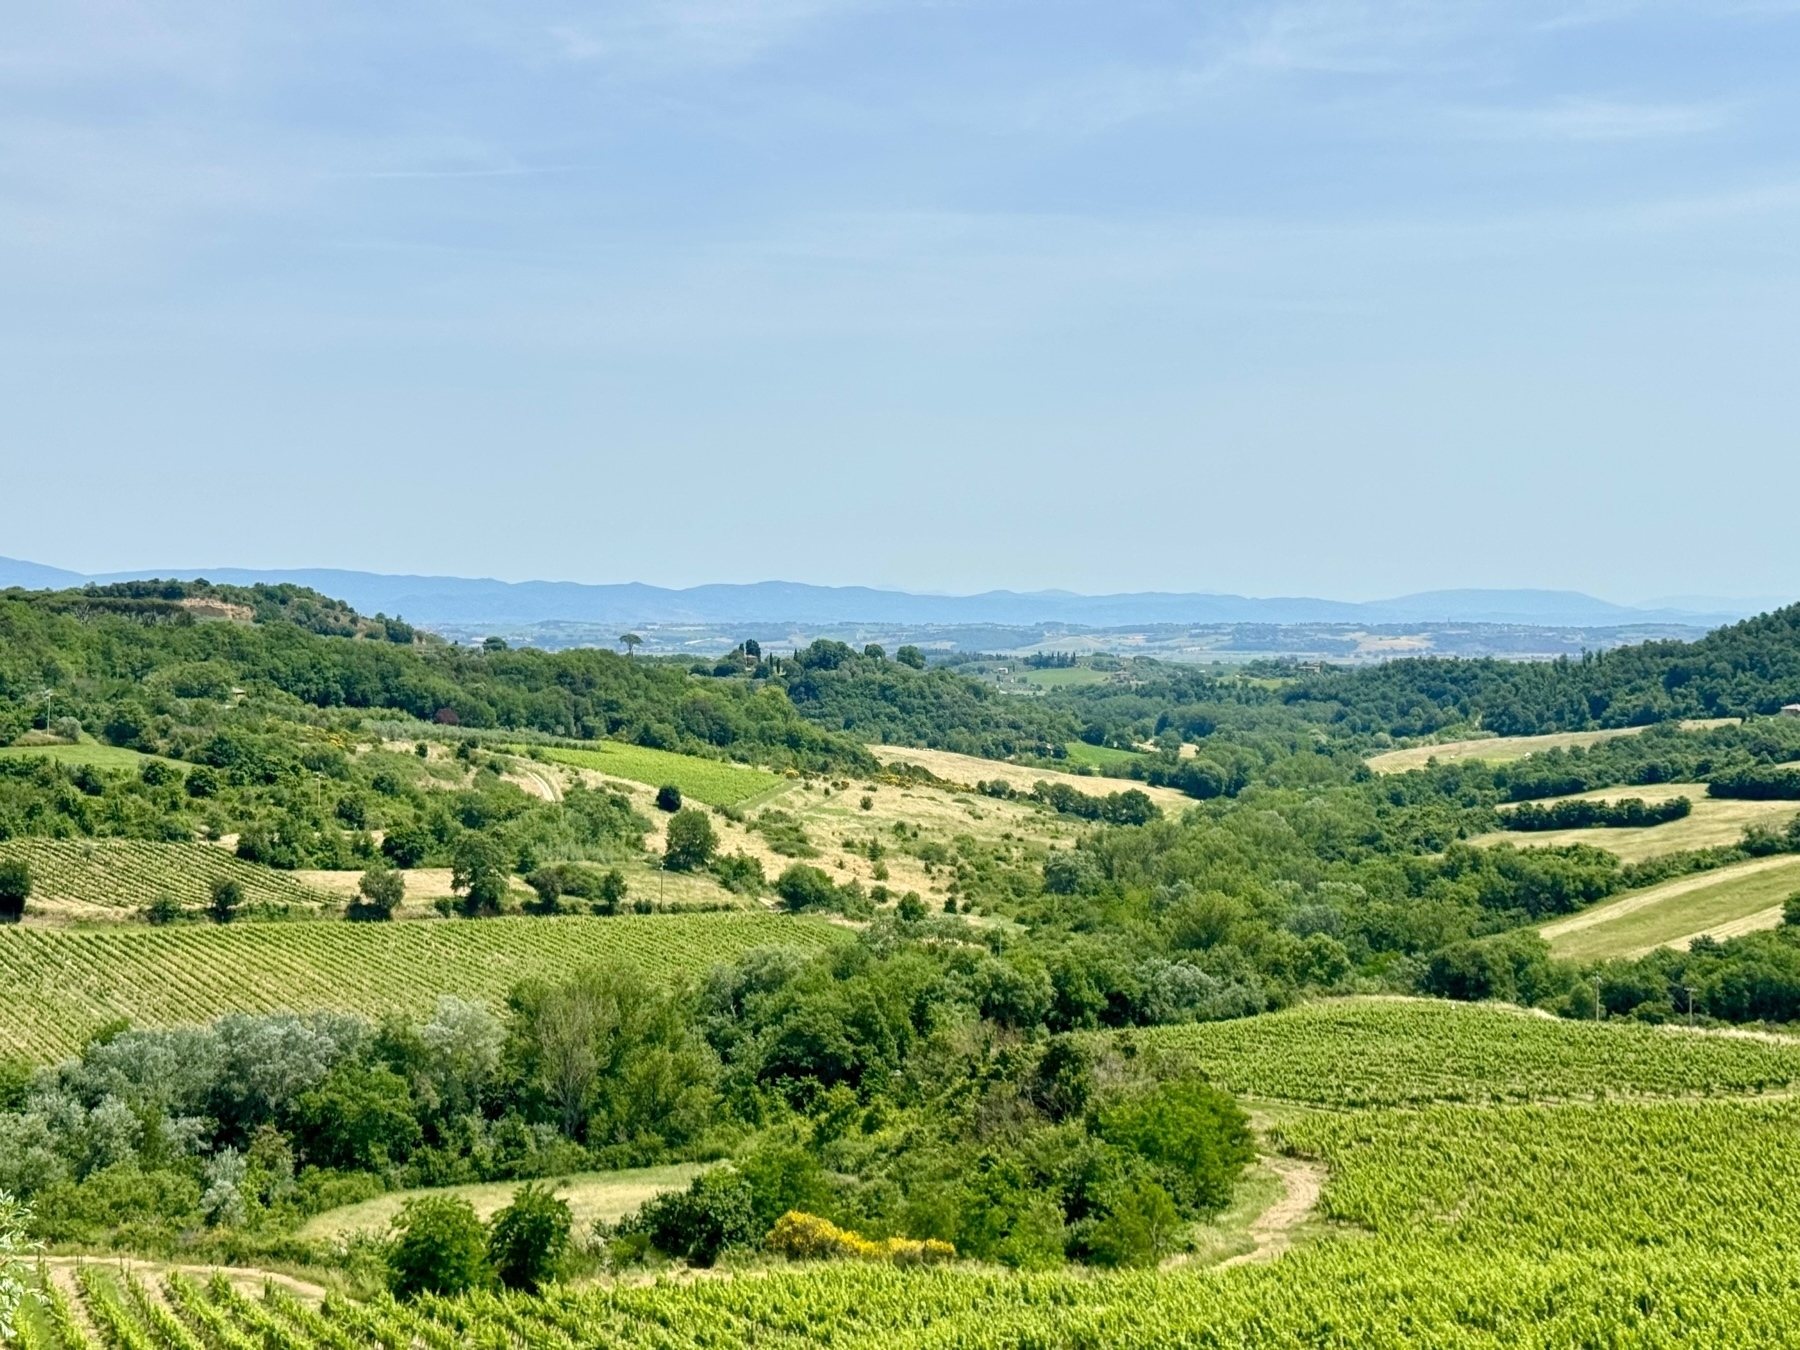 View of a lush, green landscape with rolling hills and vineyards. The horizon shows distant mountains under a clear, blue sky.